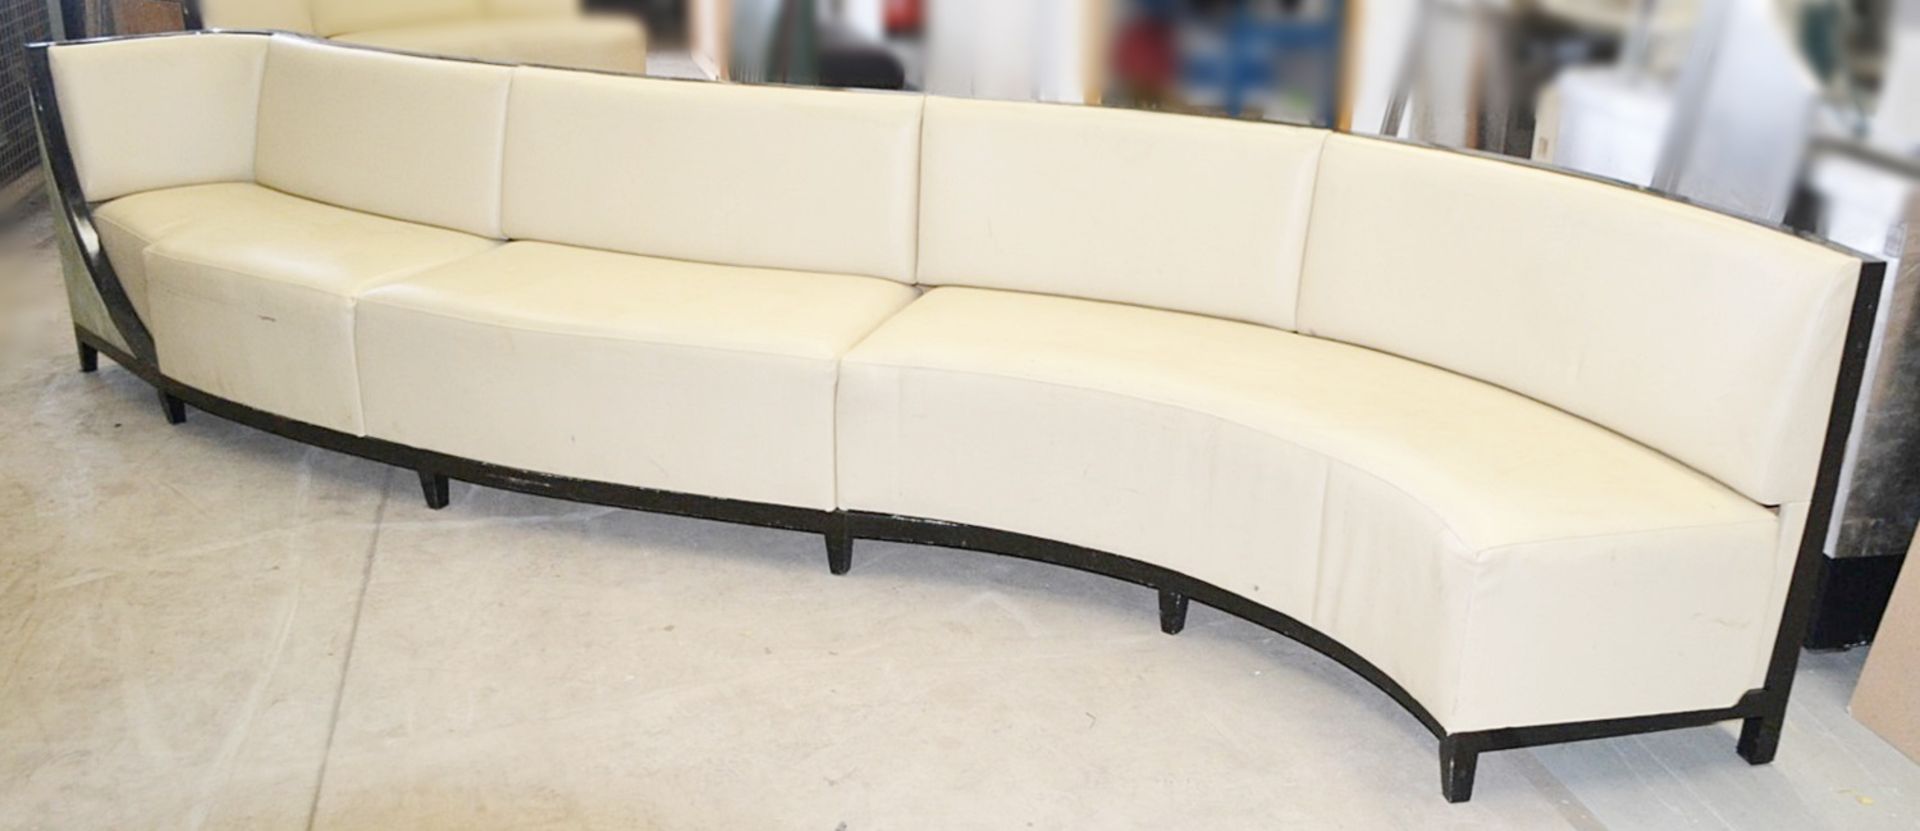 5 x Assorted Sections Of Curved Commercial Seating Upholstered In A Cream Faux Leather - Image 5 of 23